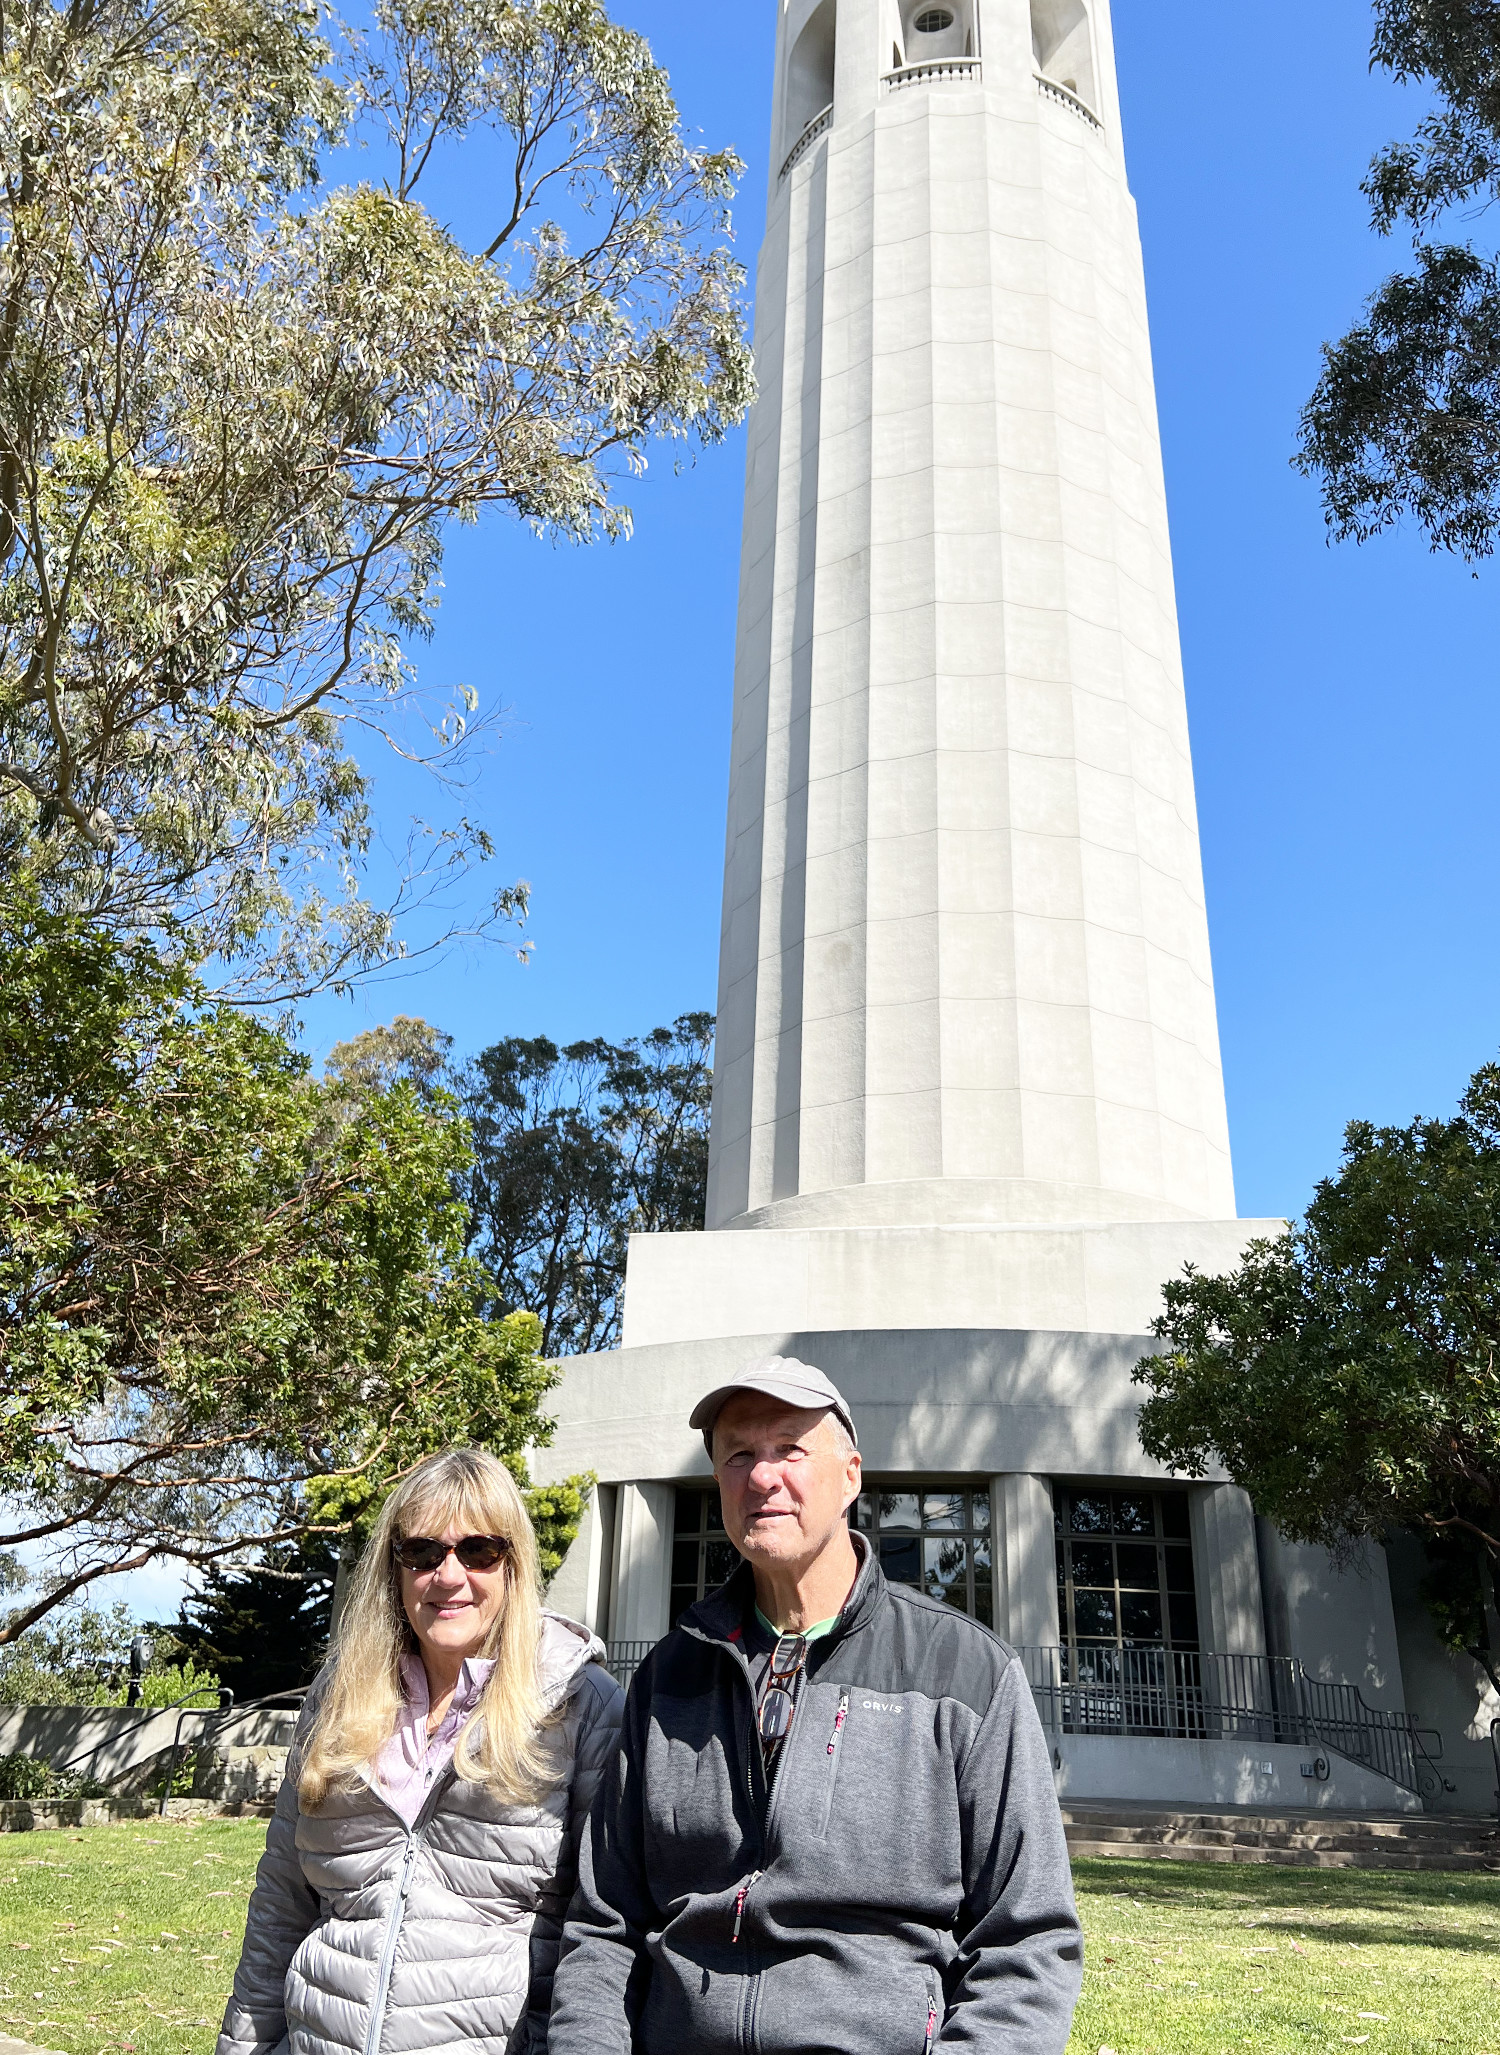 Mike and Kathy in front of Coit Tower